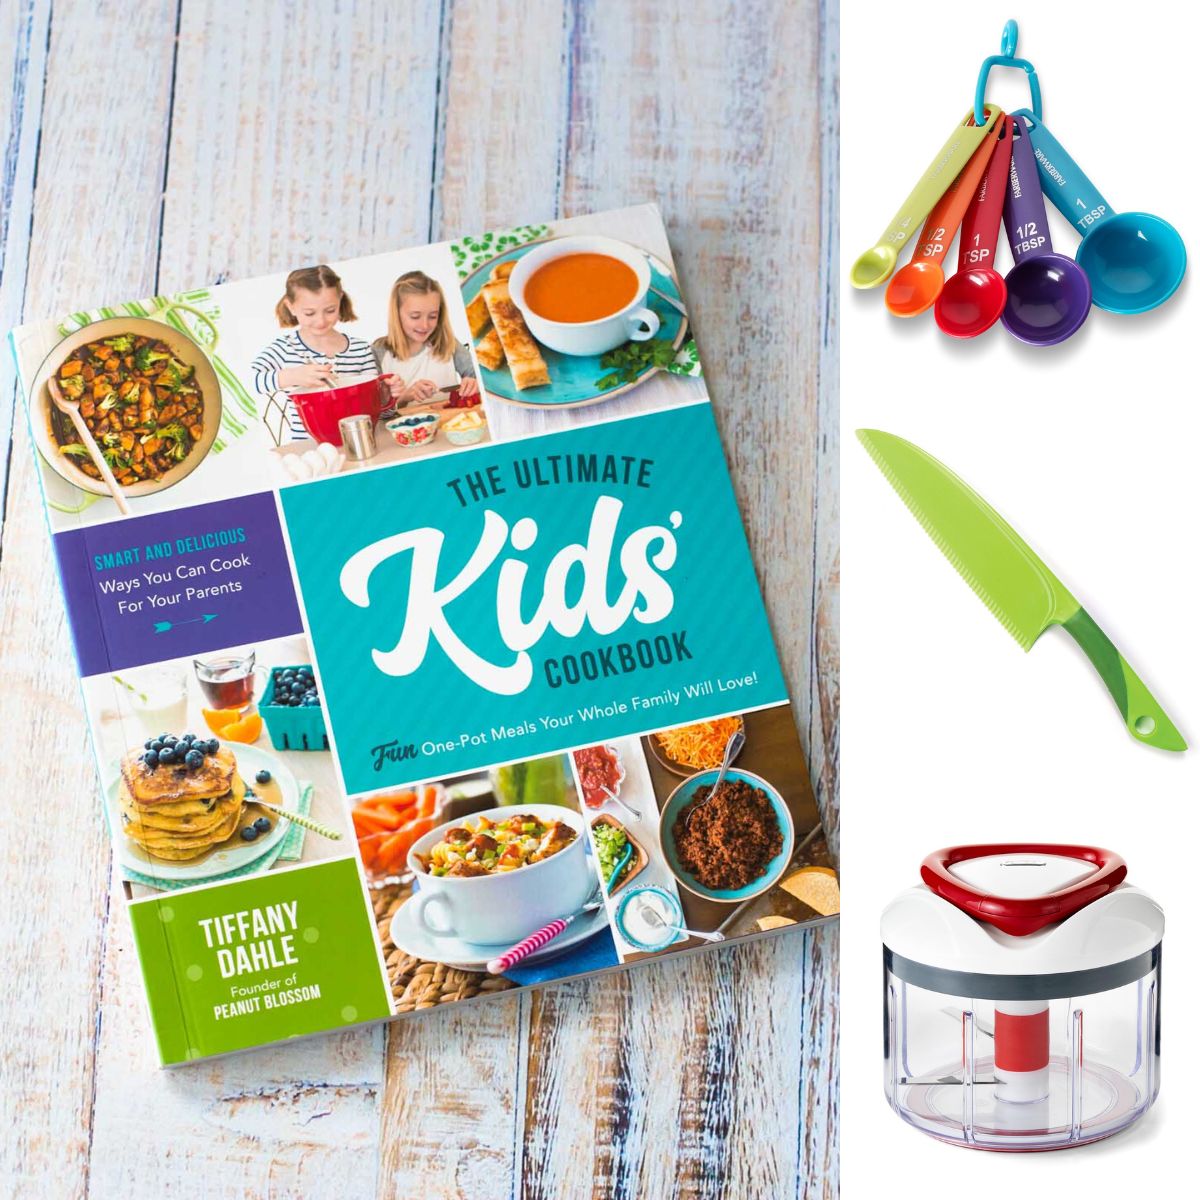 A photo collage shows several popular cooking tools for kids.